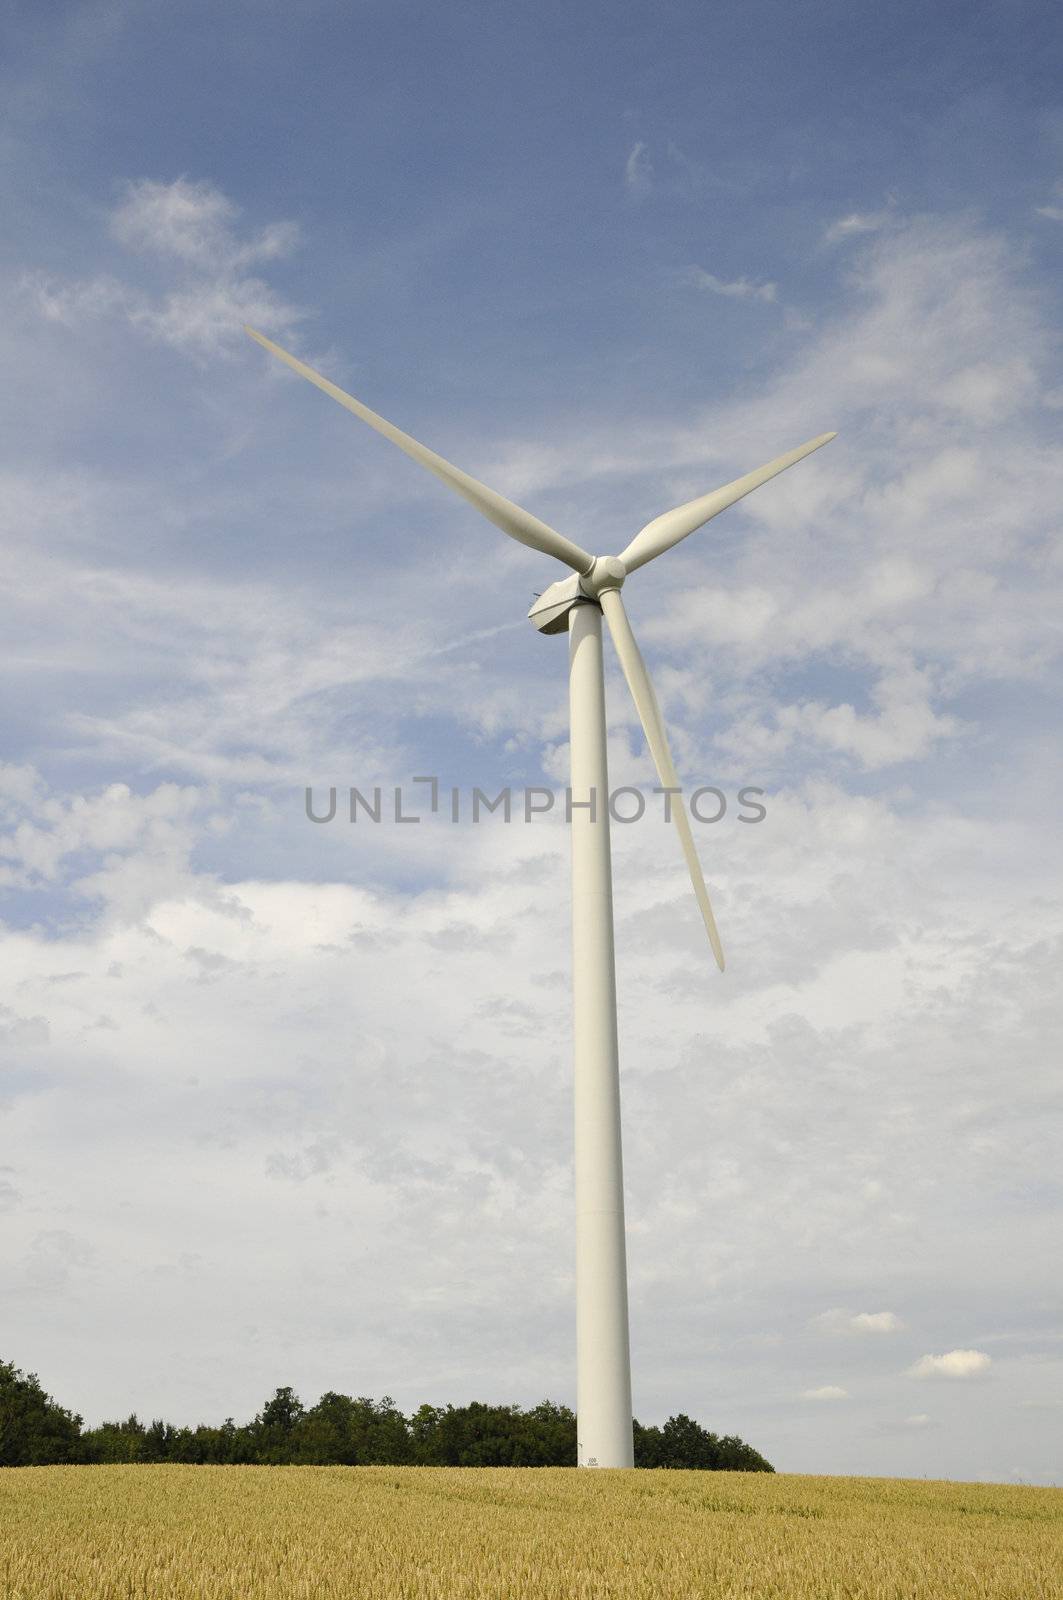 Wind turbine in a cereal field with a blue and cloudy sky